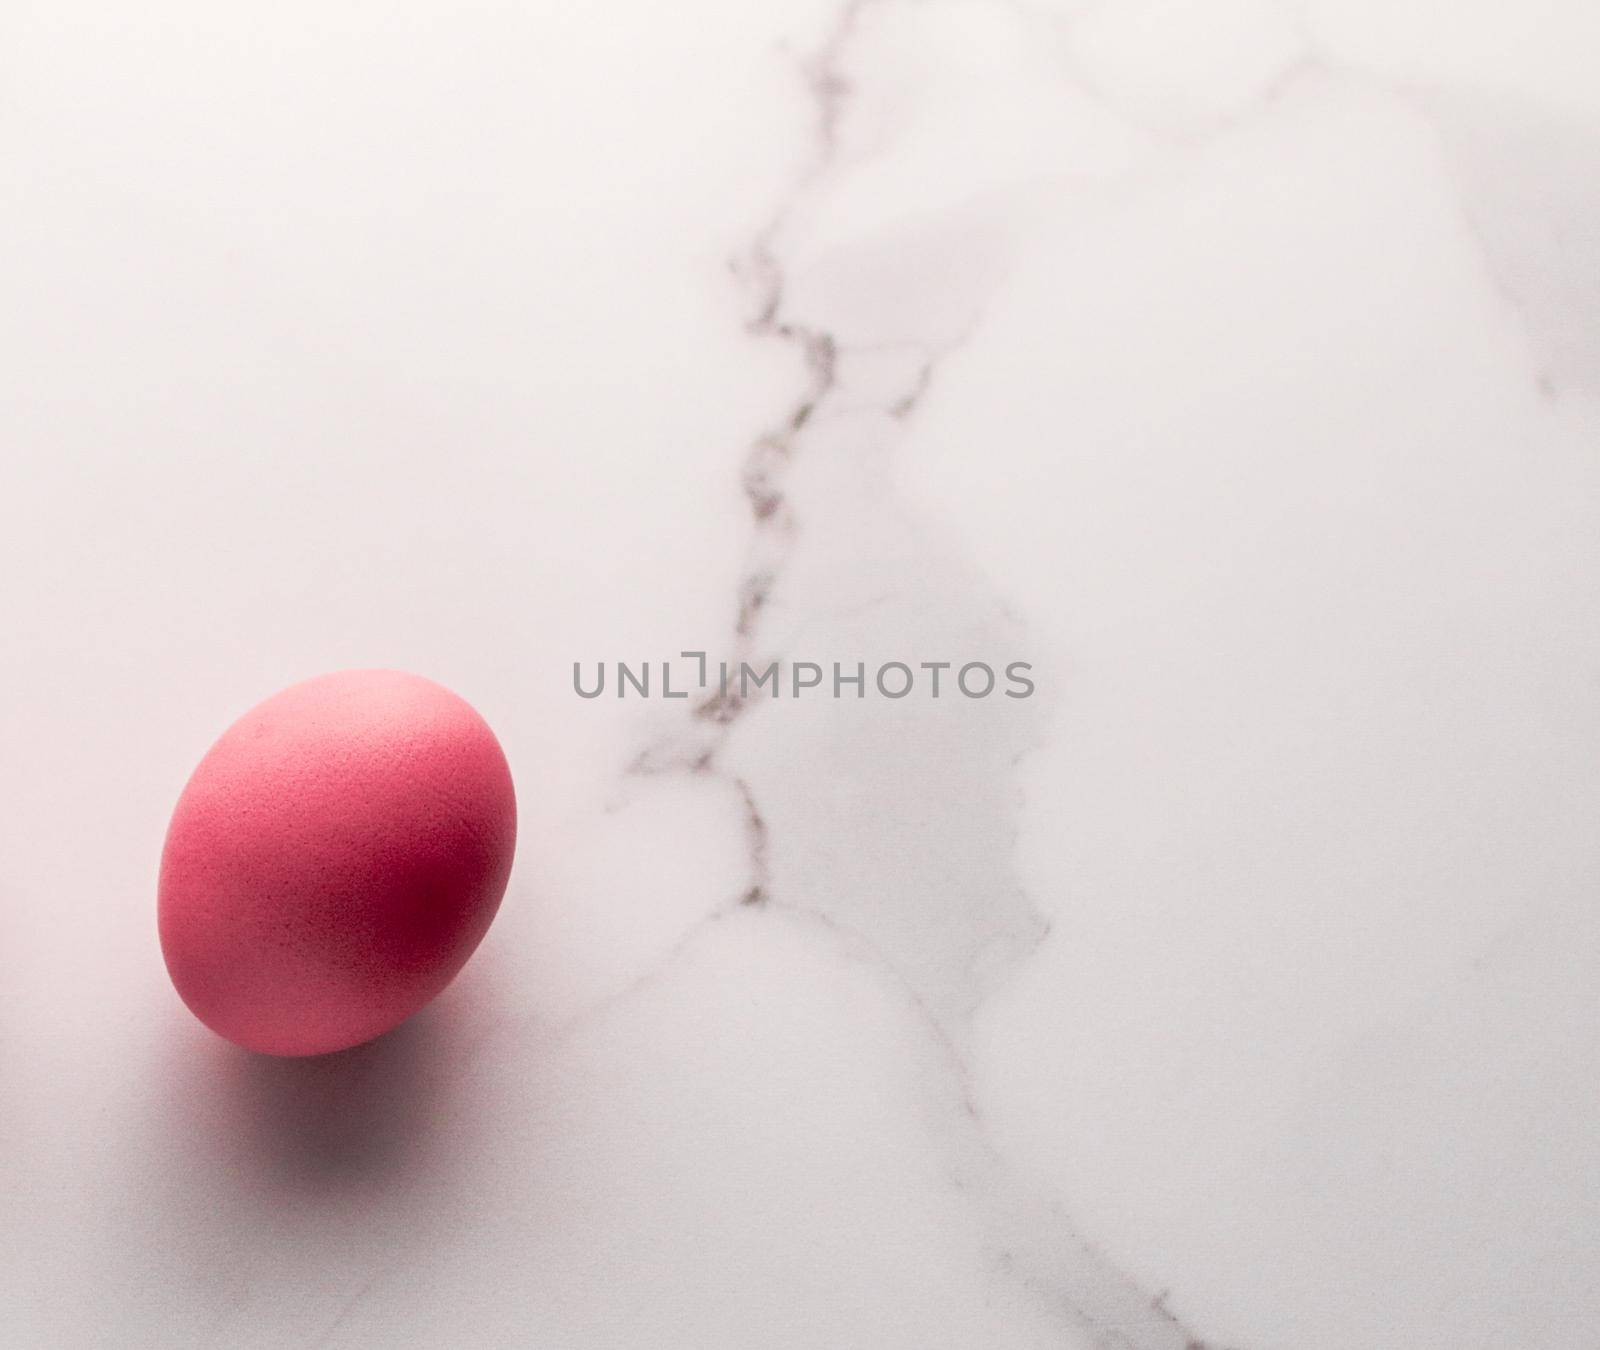 Ingredient, branding and diet concept - Egg on marble table as minimalistic food flat lay, top view food brand photography flatlay and recipe inspiration for cooking blog, menu or cookbook design